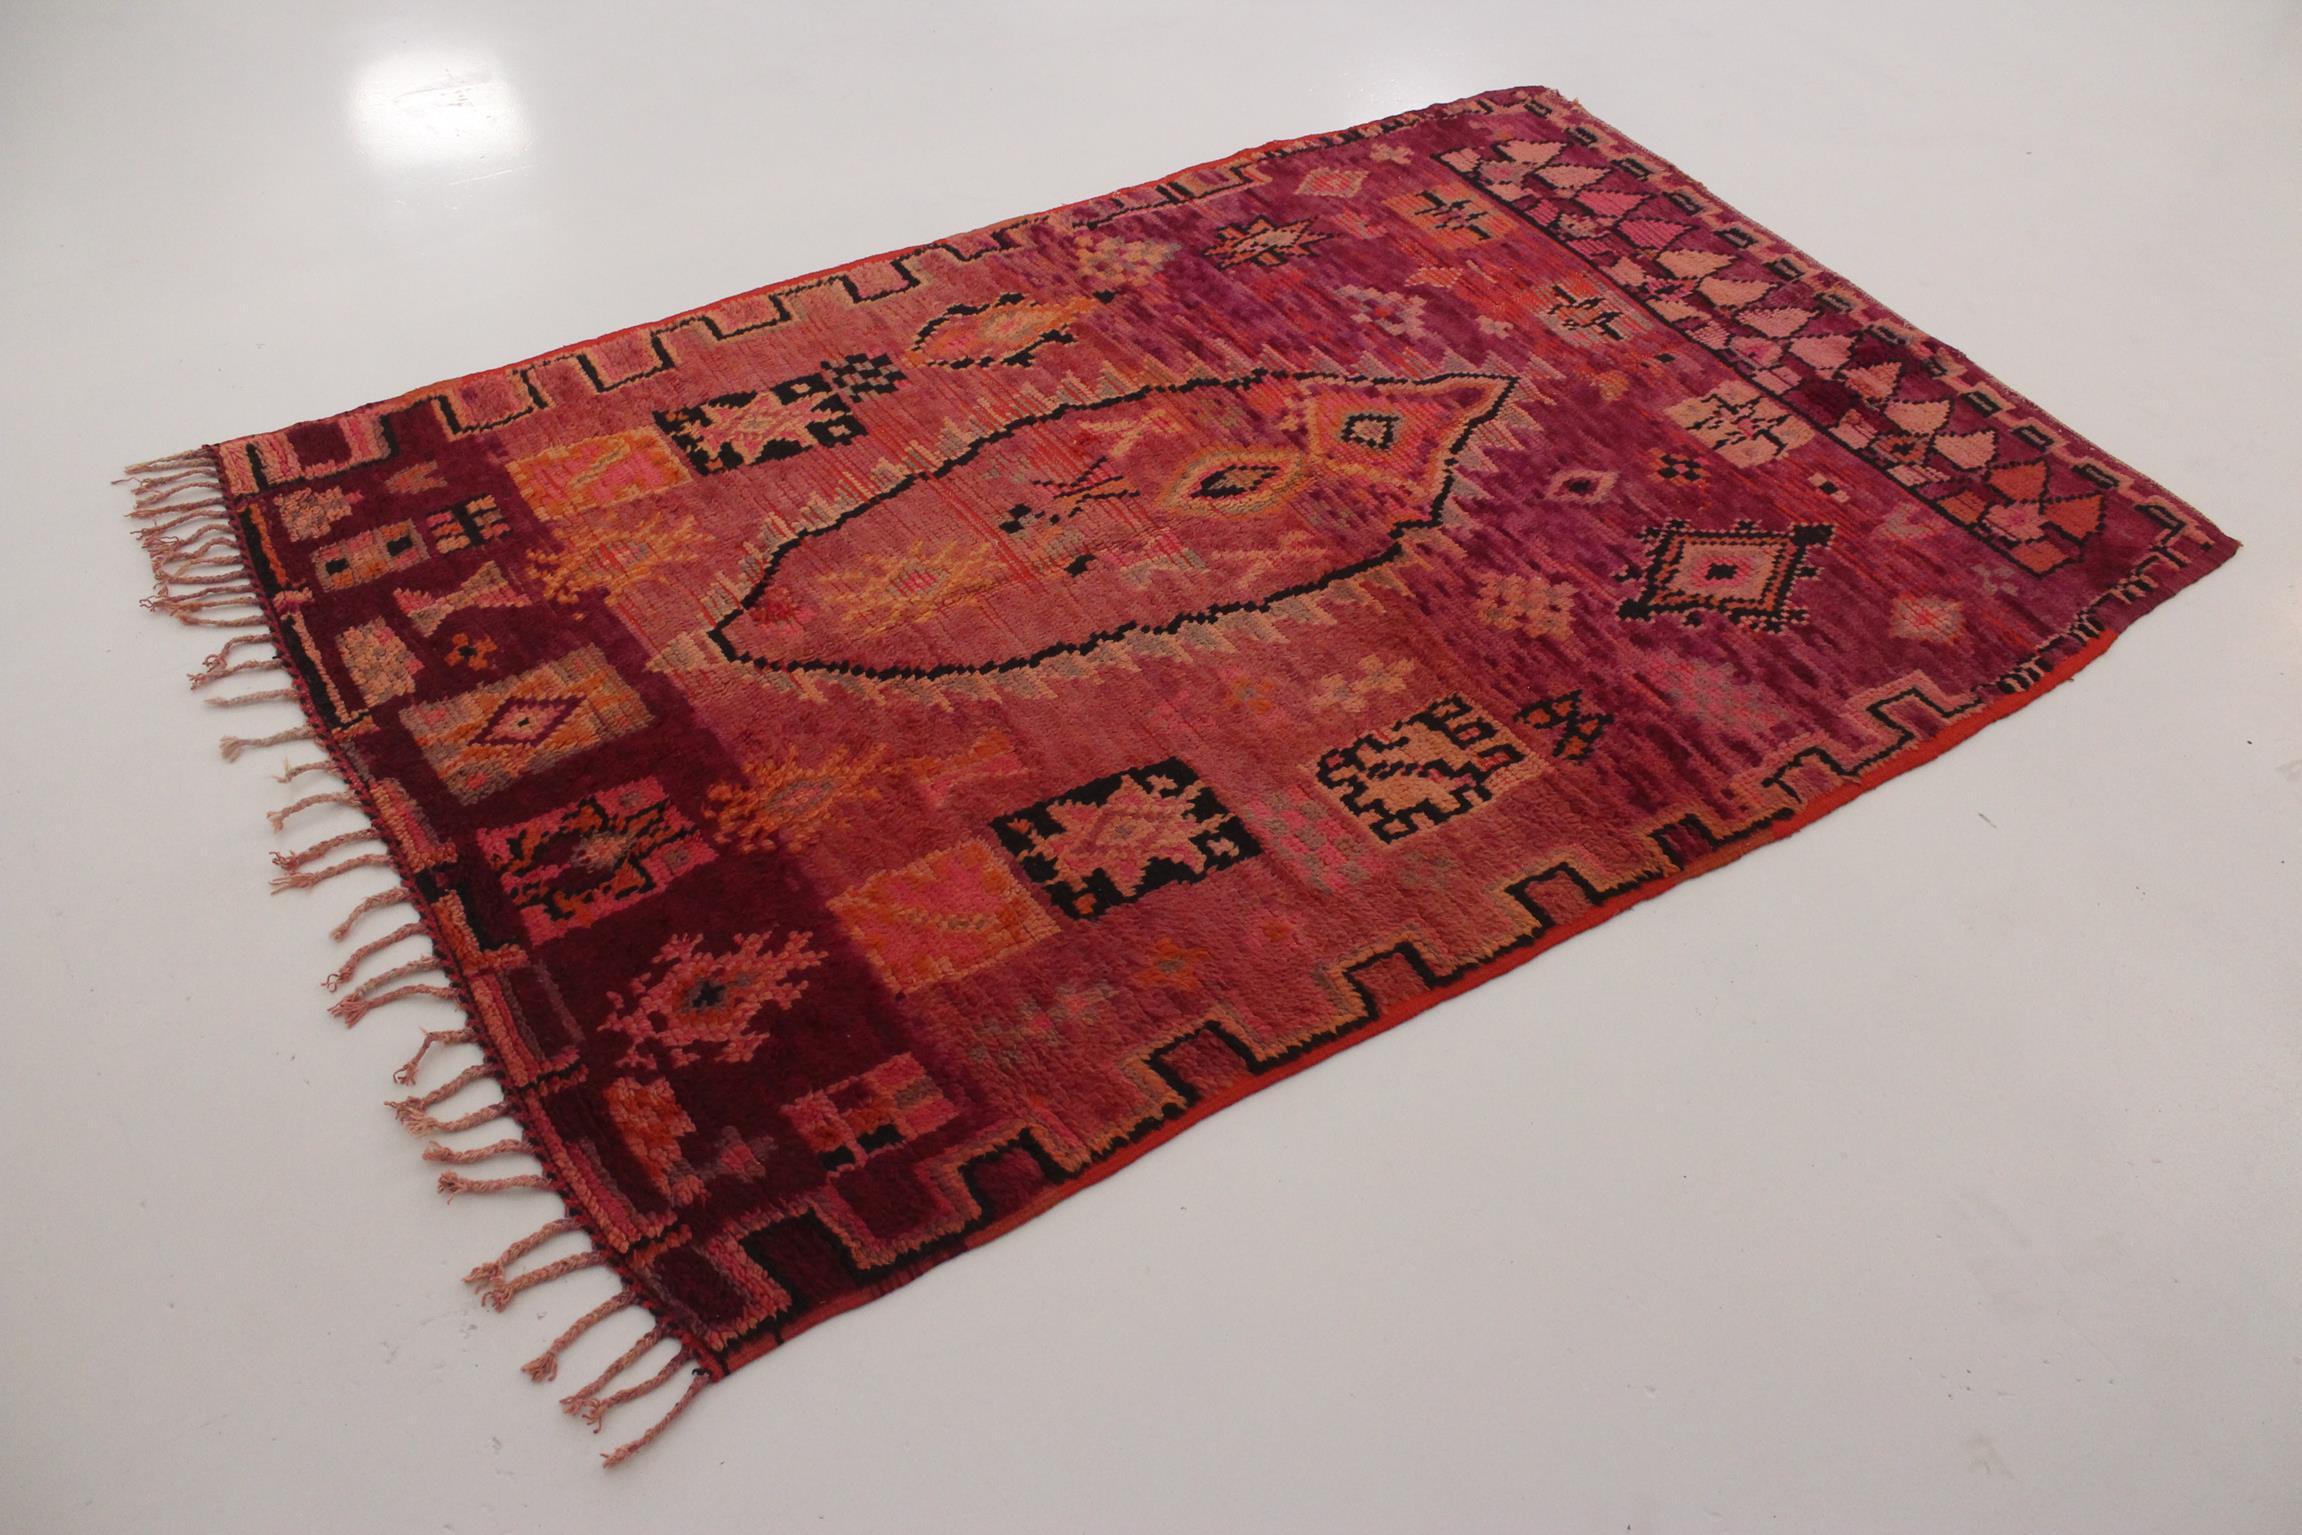 Vintage Moroccan Boujad rug - Red/purple - 5.3x8.1feet / 162x247cm In Good Condition For Sale In Marrakech, MA